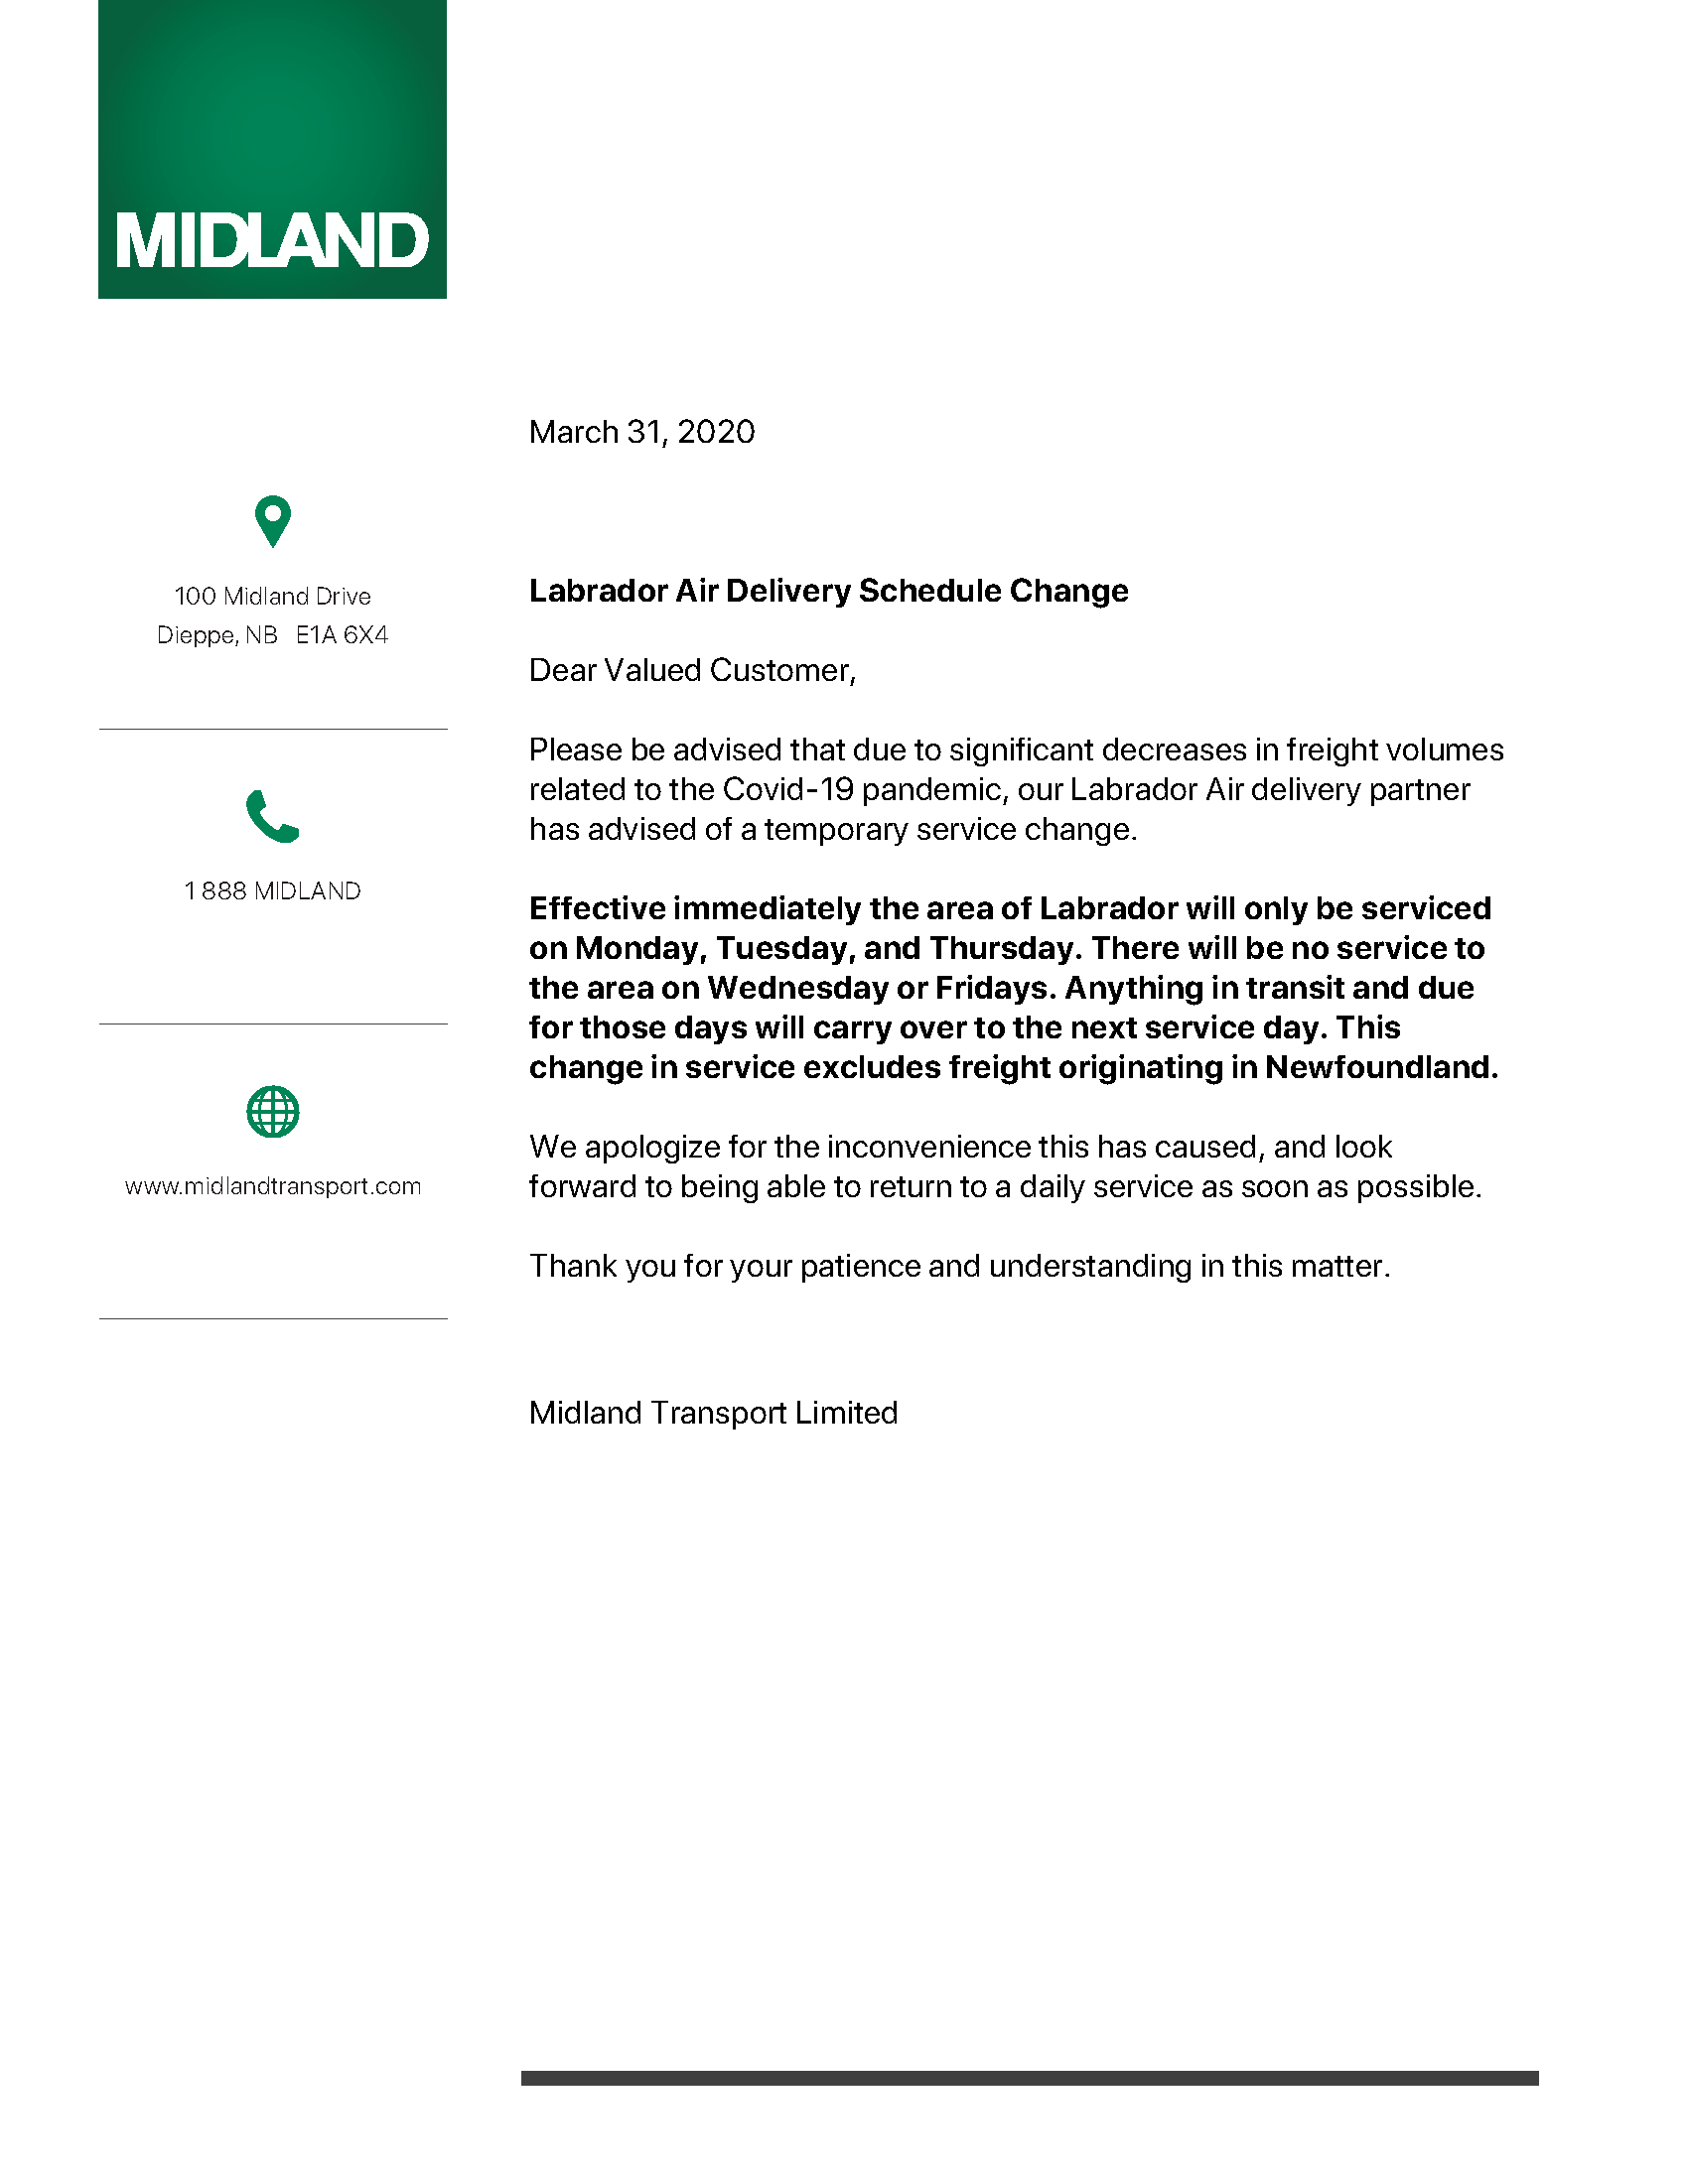 Labrador Air Delivery Schedule Change  - March 31, 2020